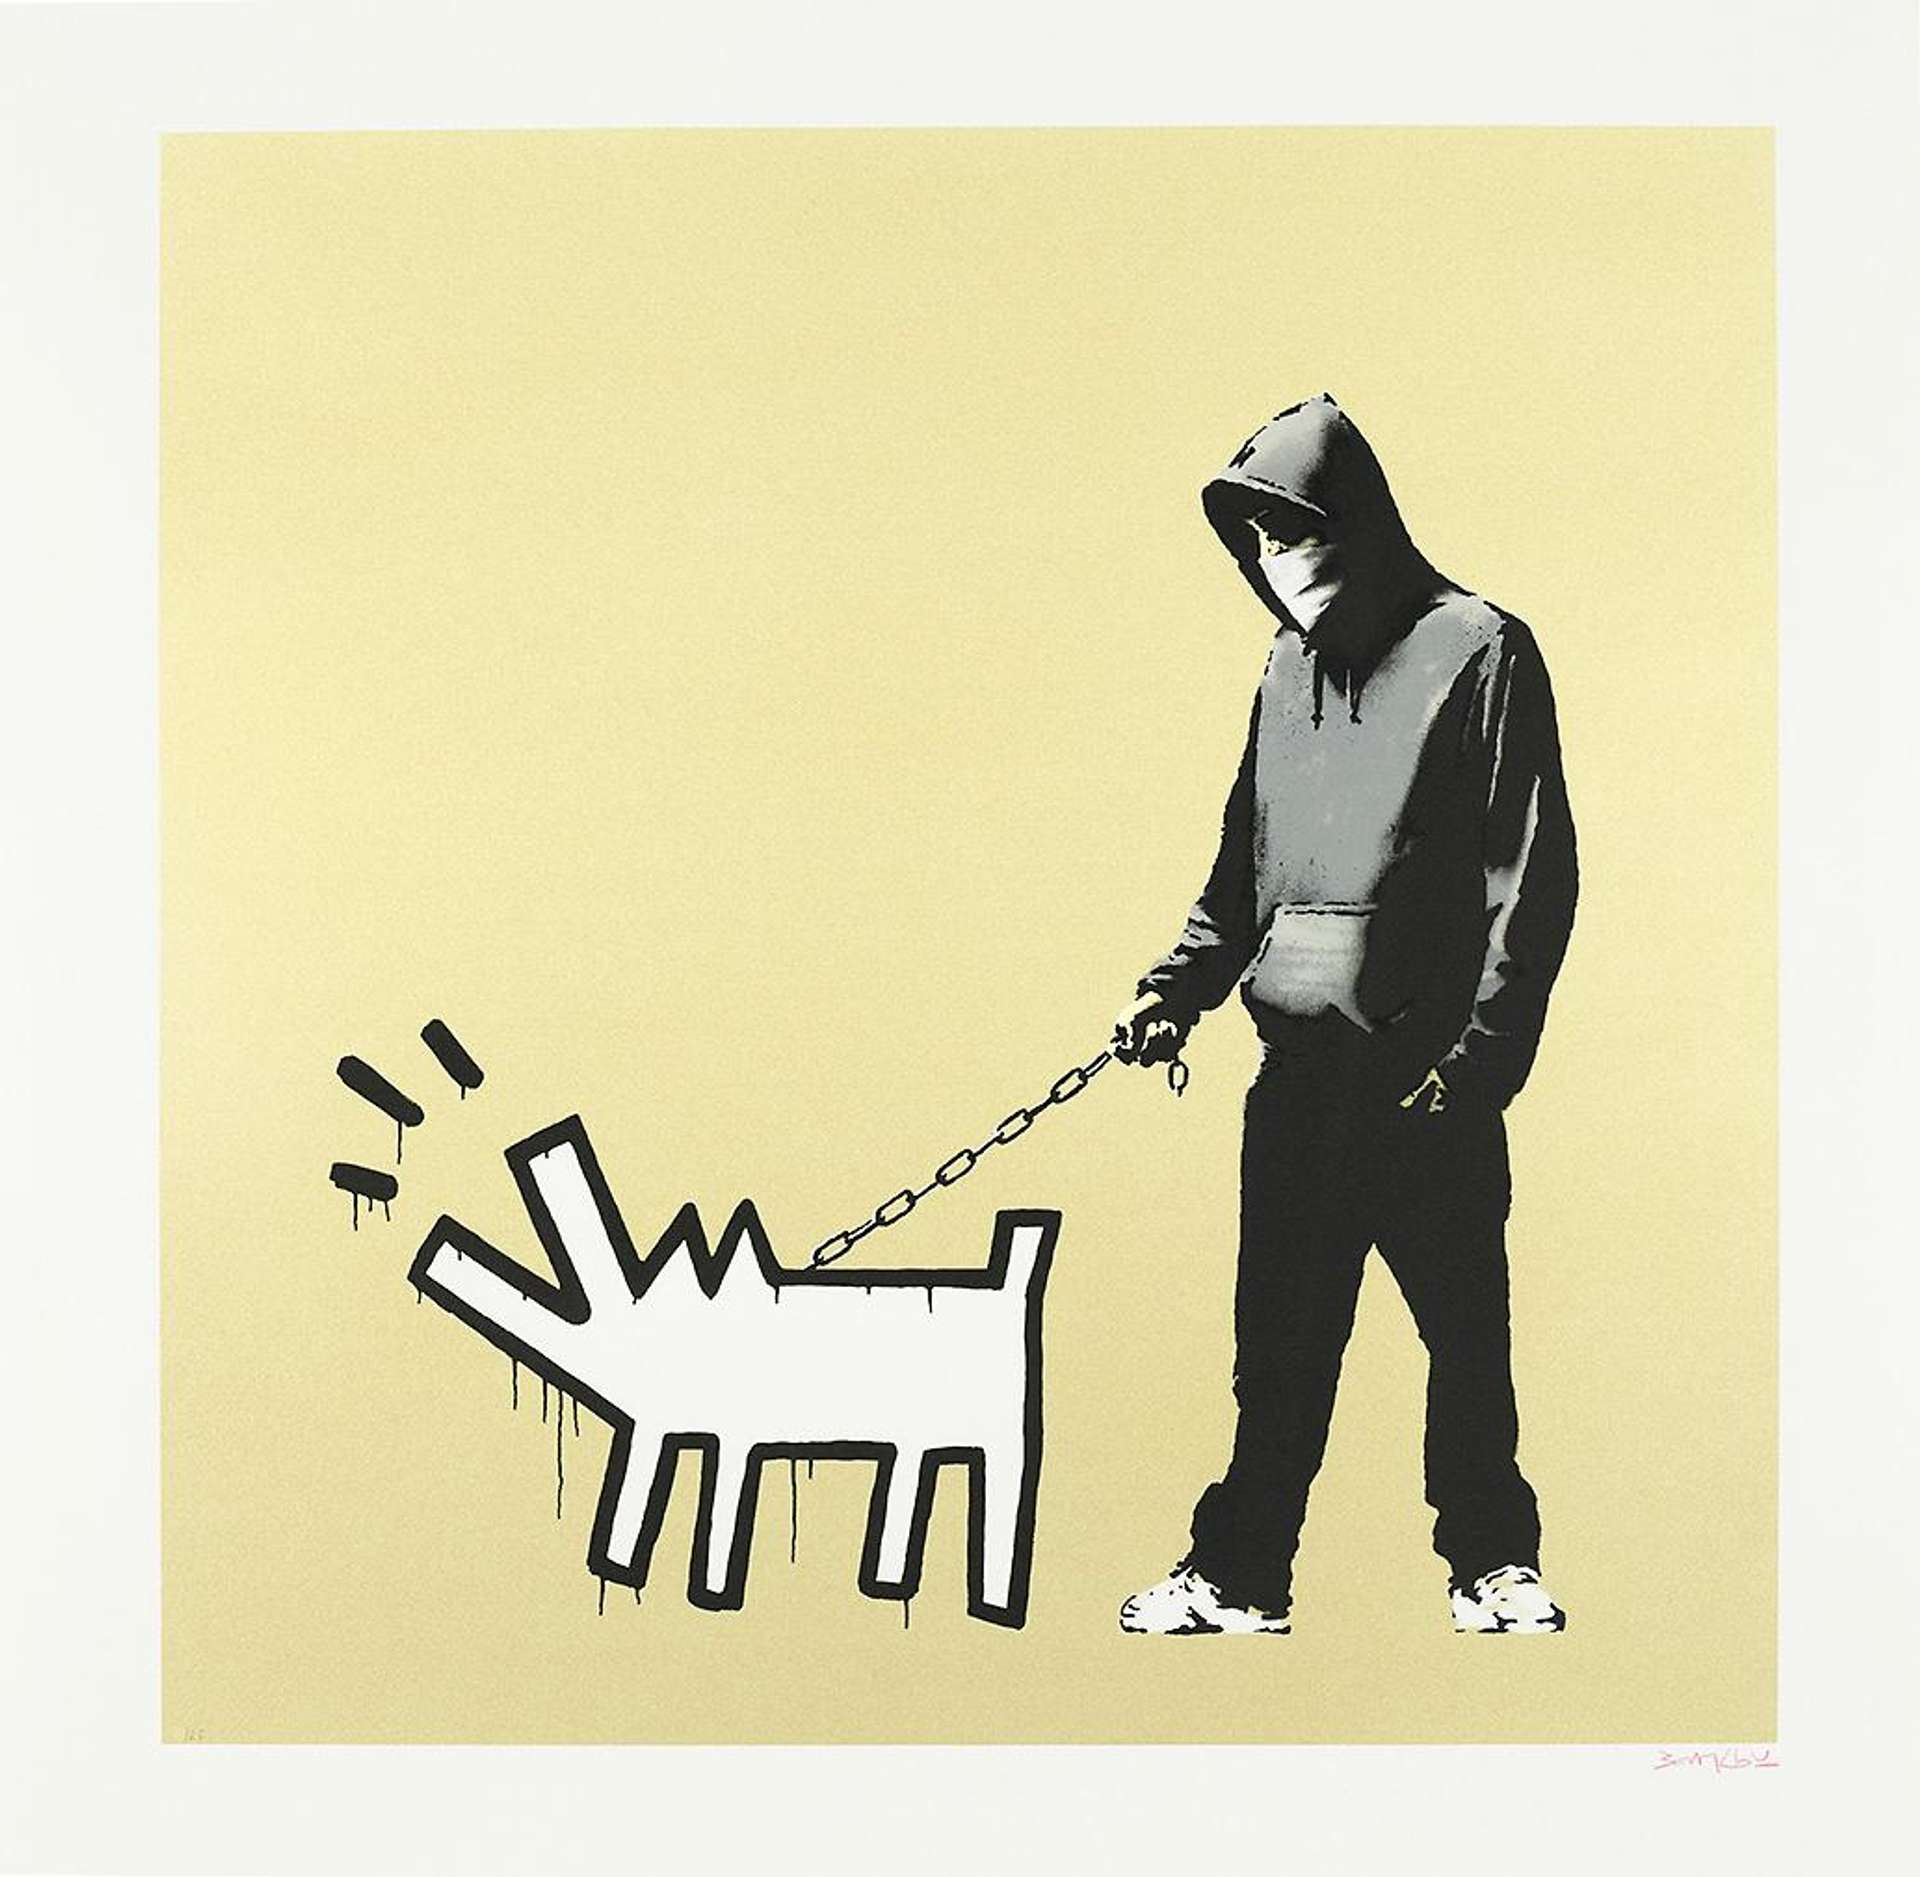 A Banksy screenprint featuring a person in denim jeans and a hooded sweatshirt, with a keith haring caricature dog on a lead, set against a gold background and framed with a white border.